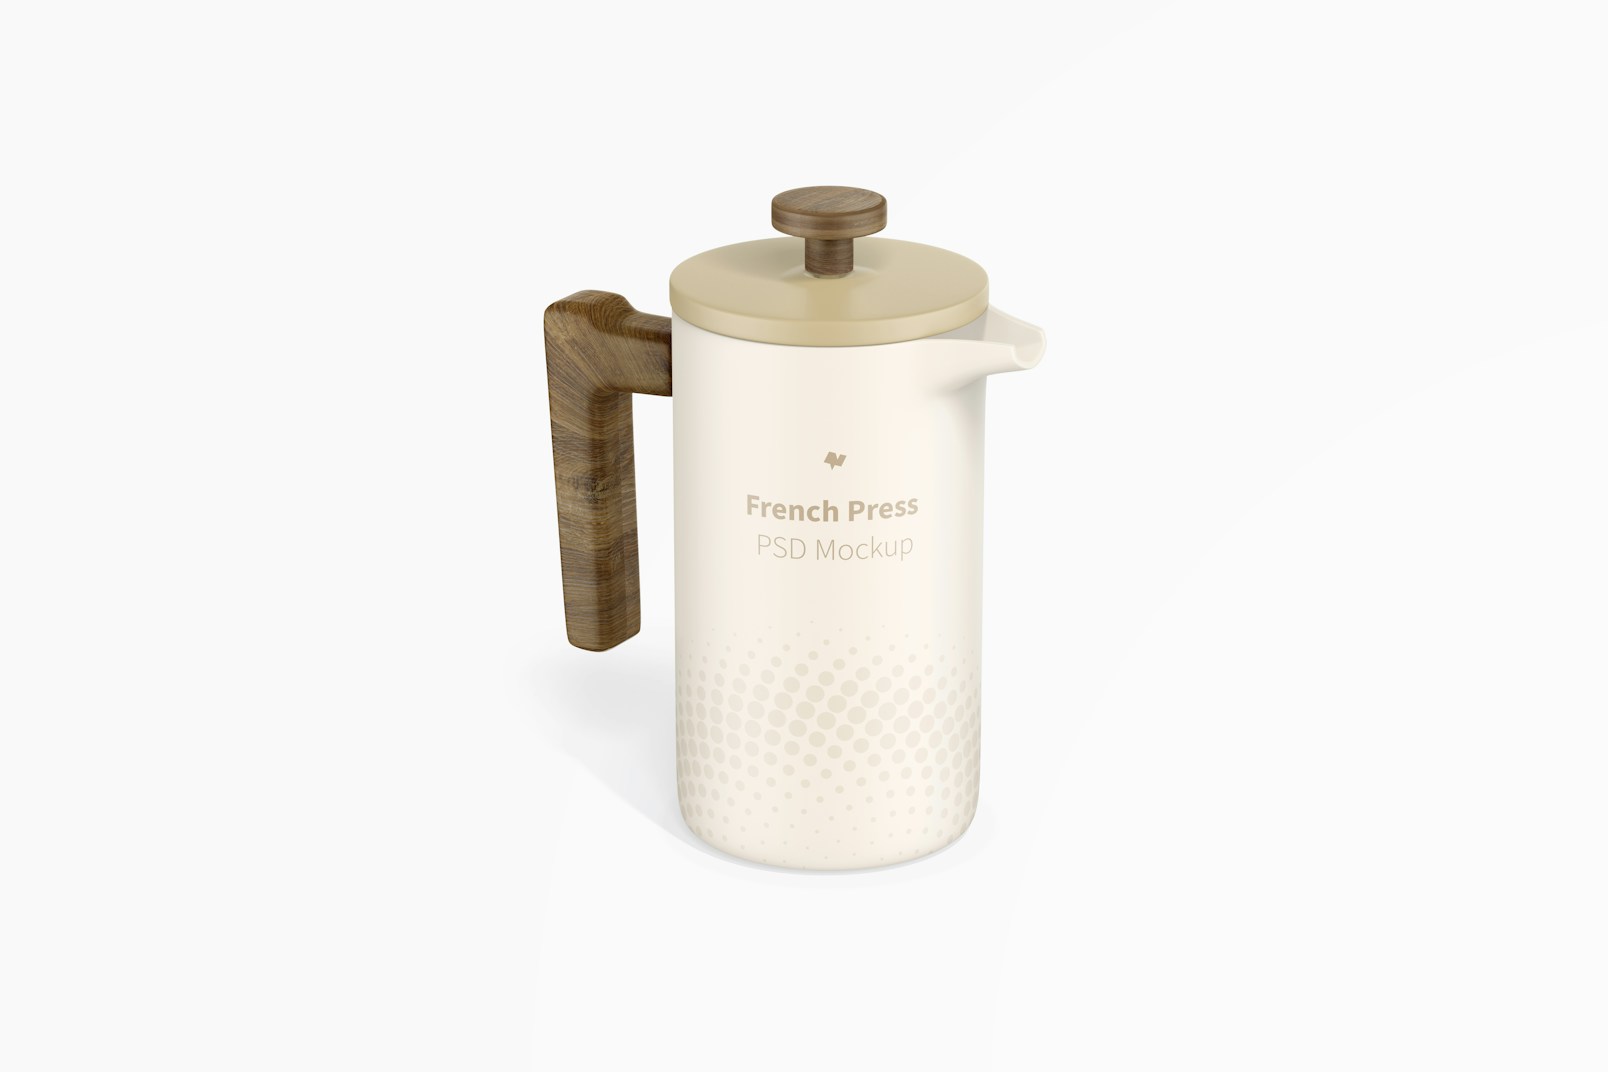 French Press Coffee Maker Mockup, Front View